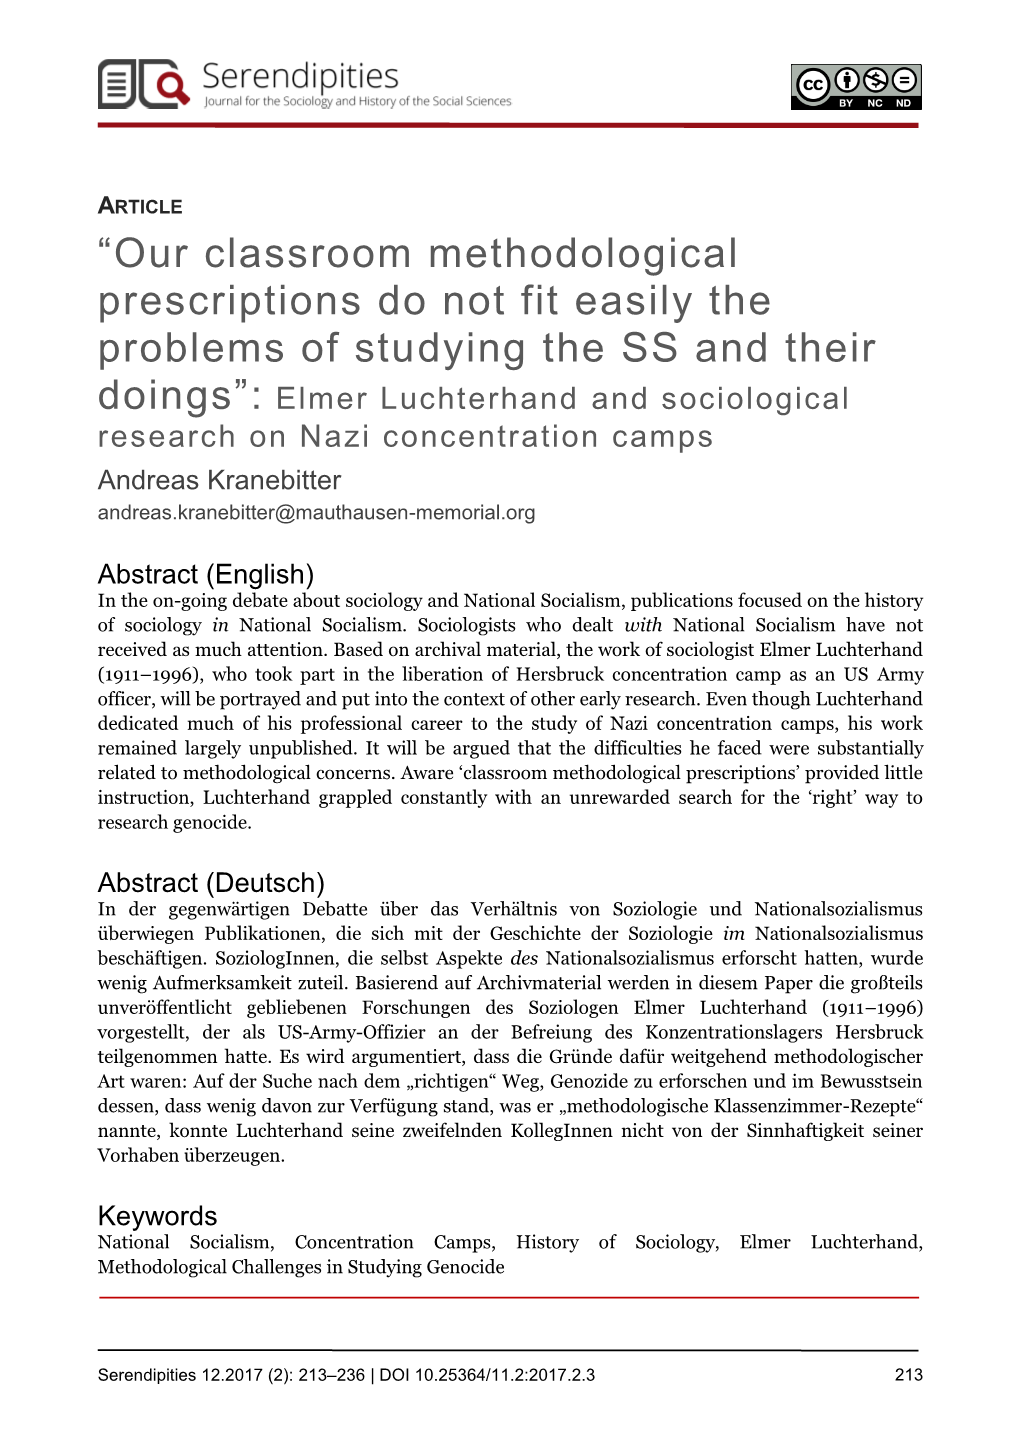 Our Classroom Methodological Prescriptions Do Not Fit